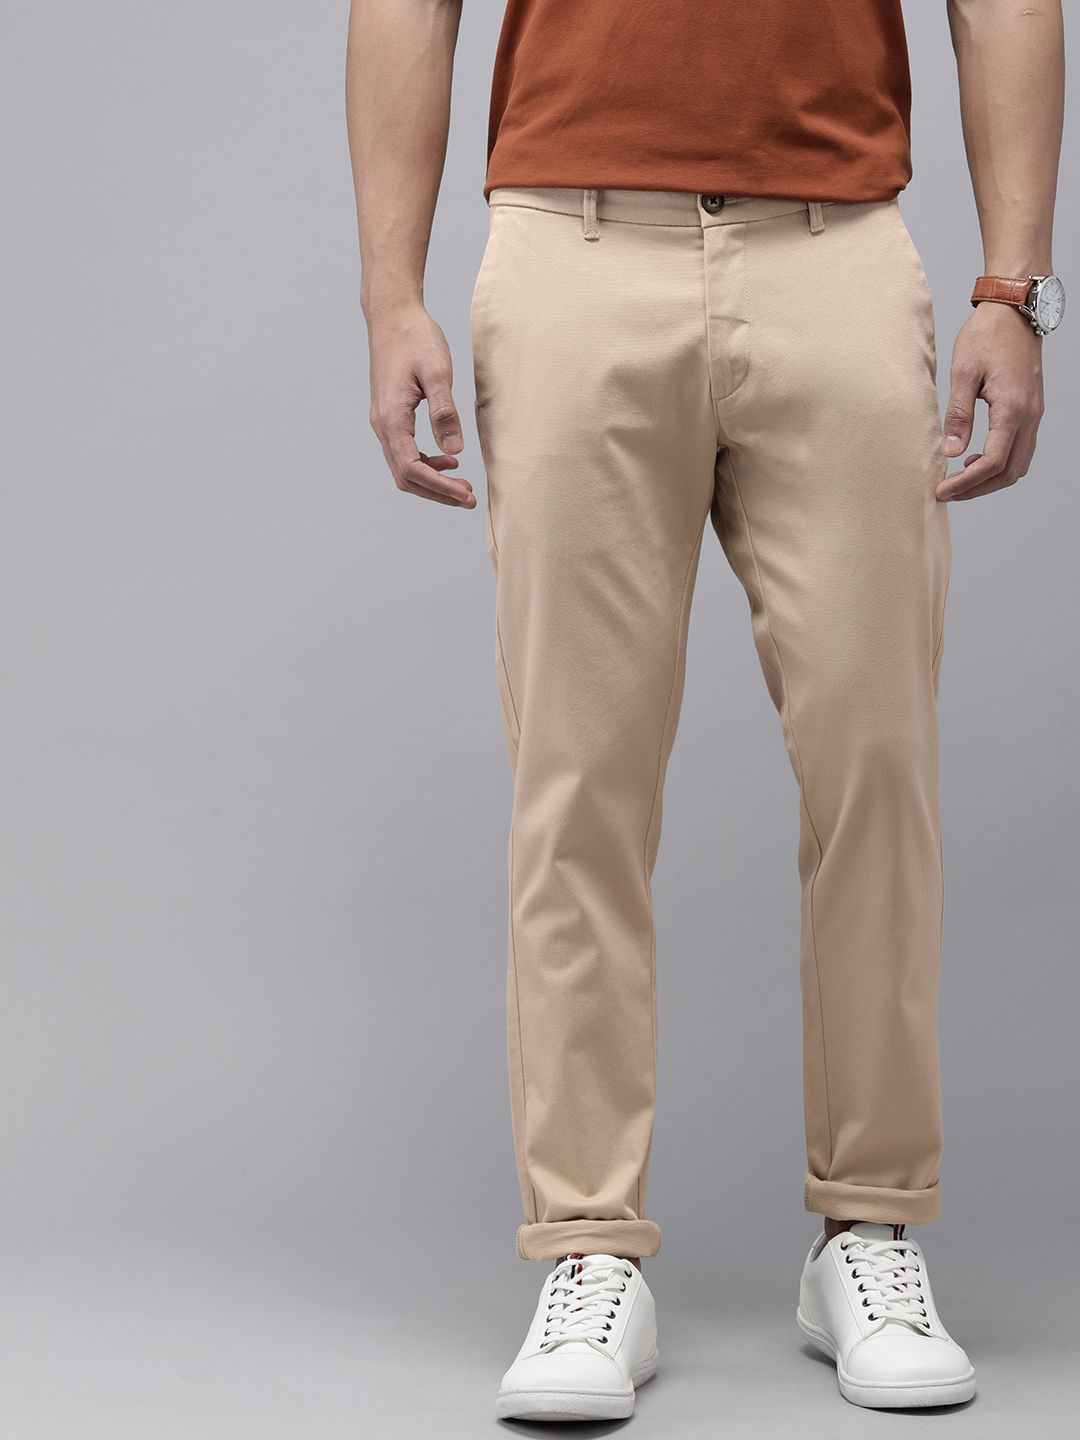 U.S. Polo Assn. Men Mid-Rise Textured Slim Fit Chinos Trousers